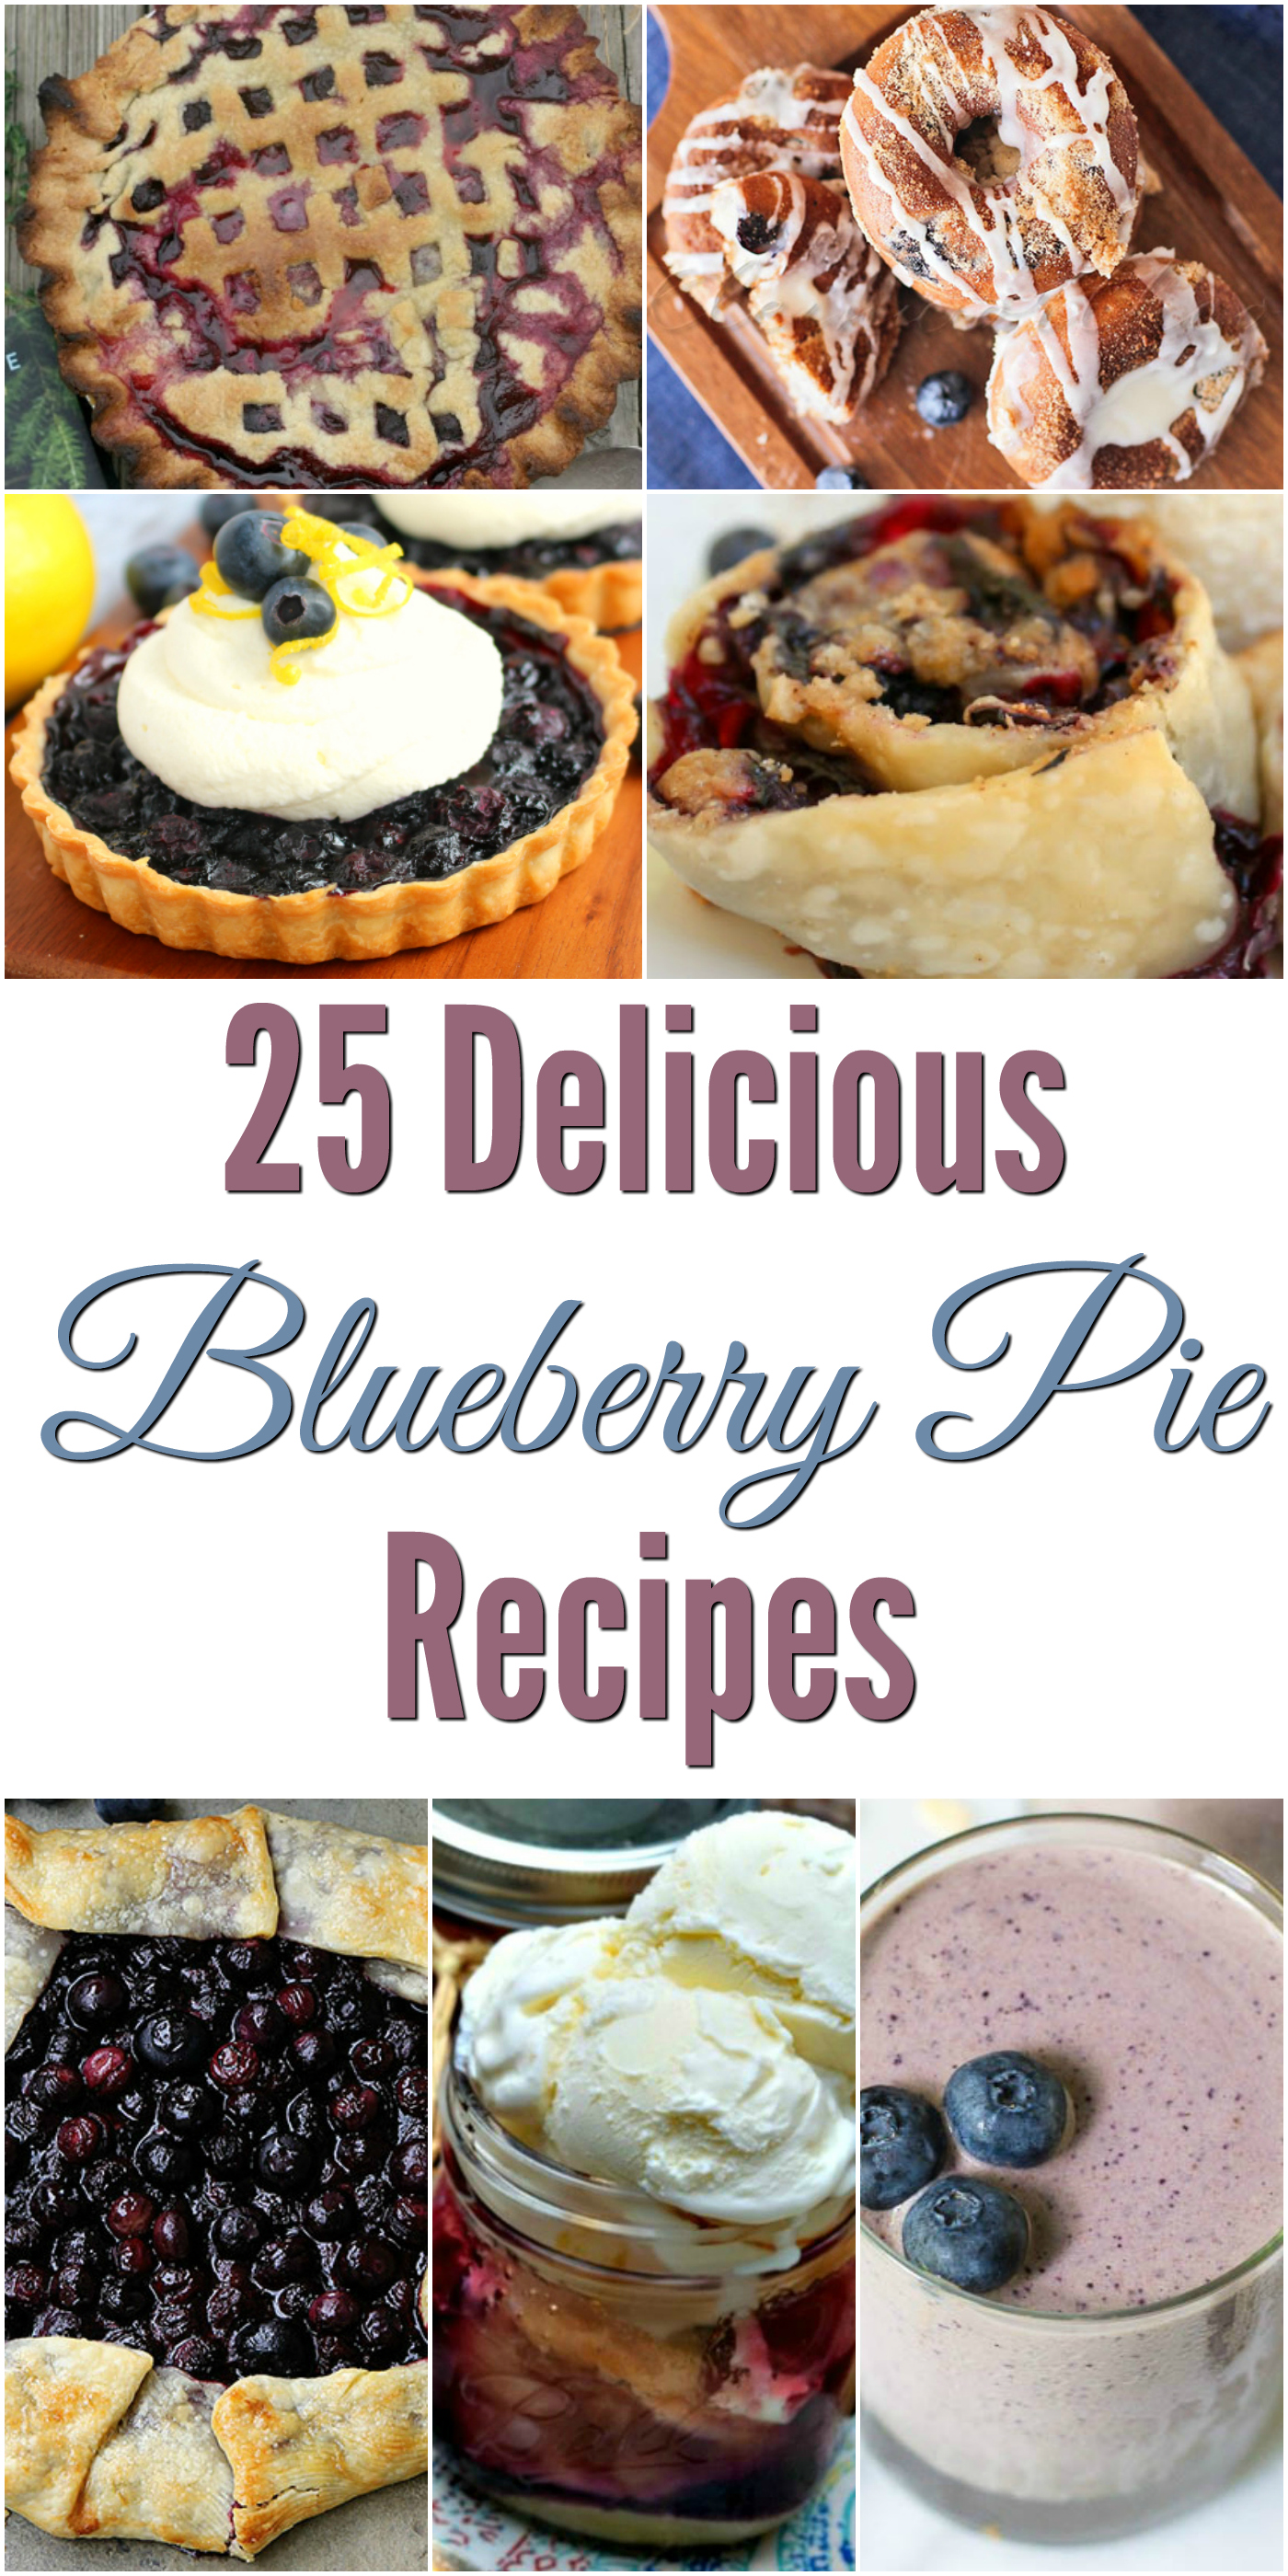 Looking for some delicious blueberry recipes? Check out these 25 Delicious Blueberry Pie Recipes here! 